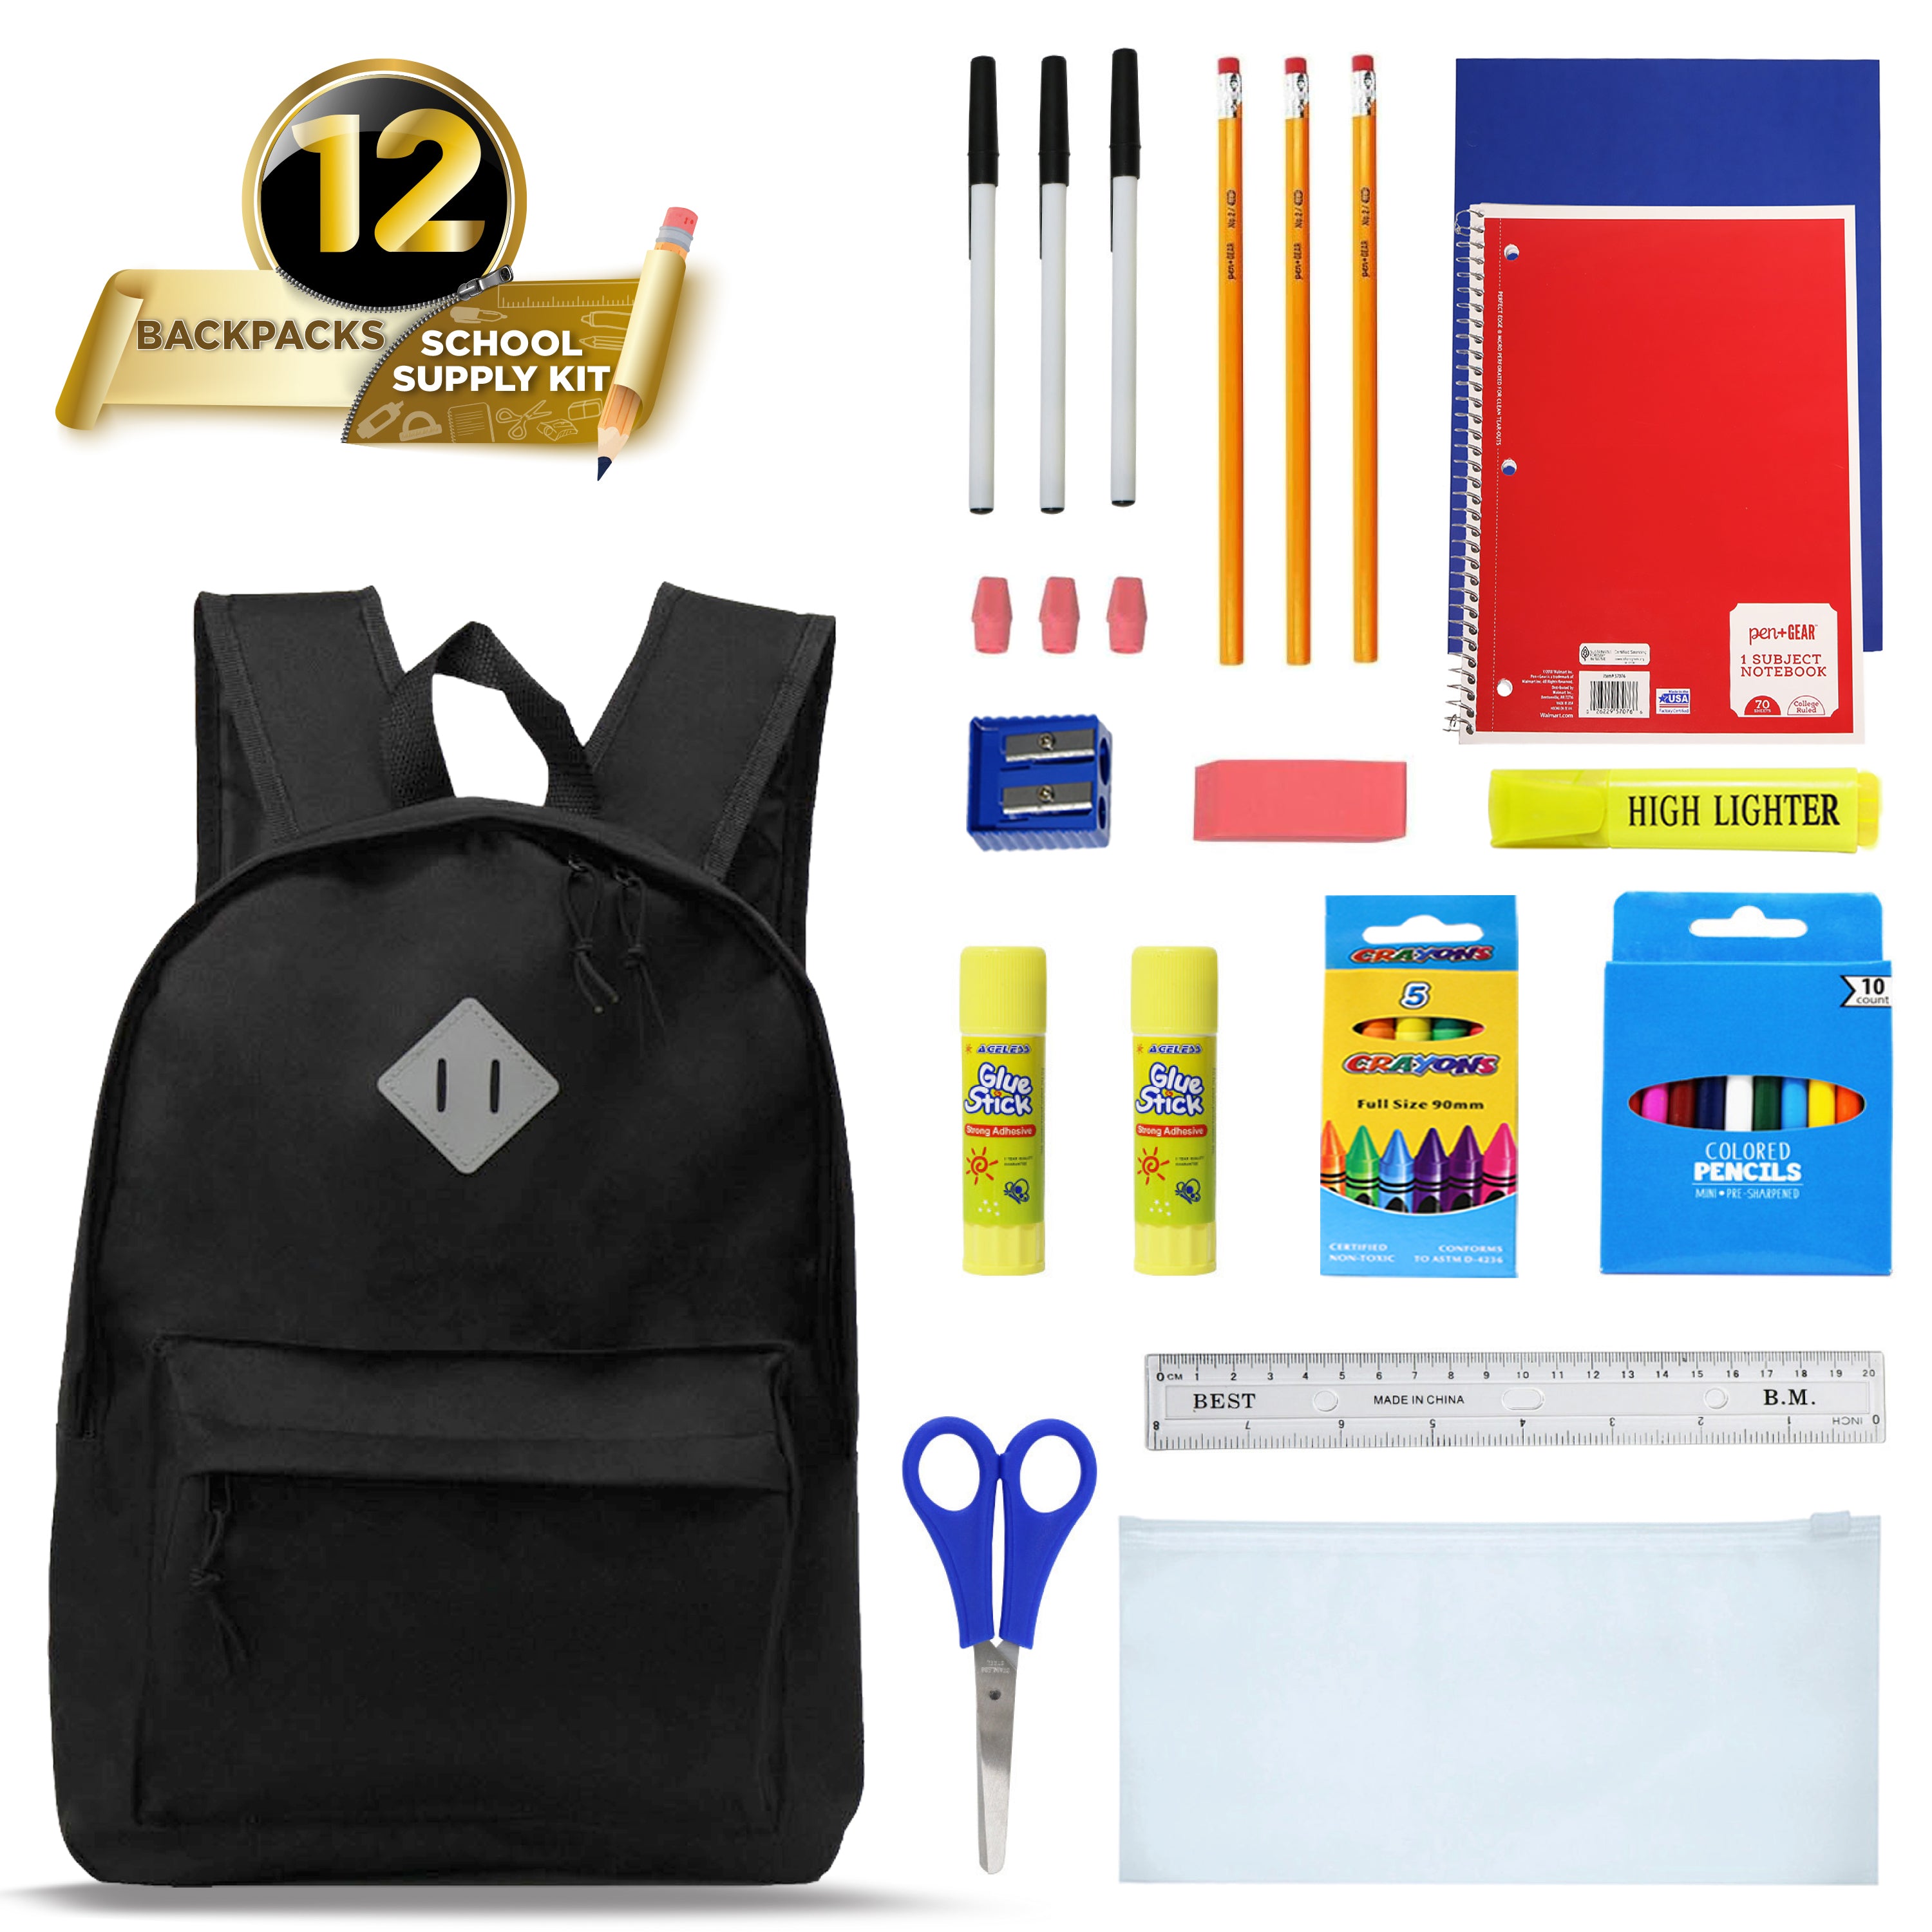 17 Inch Bulk Backpacks in Black with School Supply Kits Wholesale - Case of 12